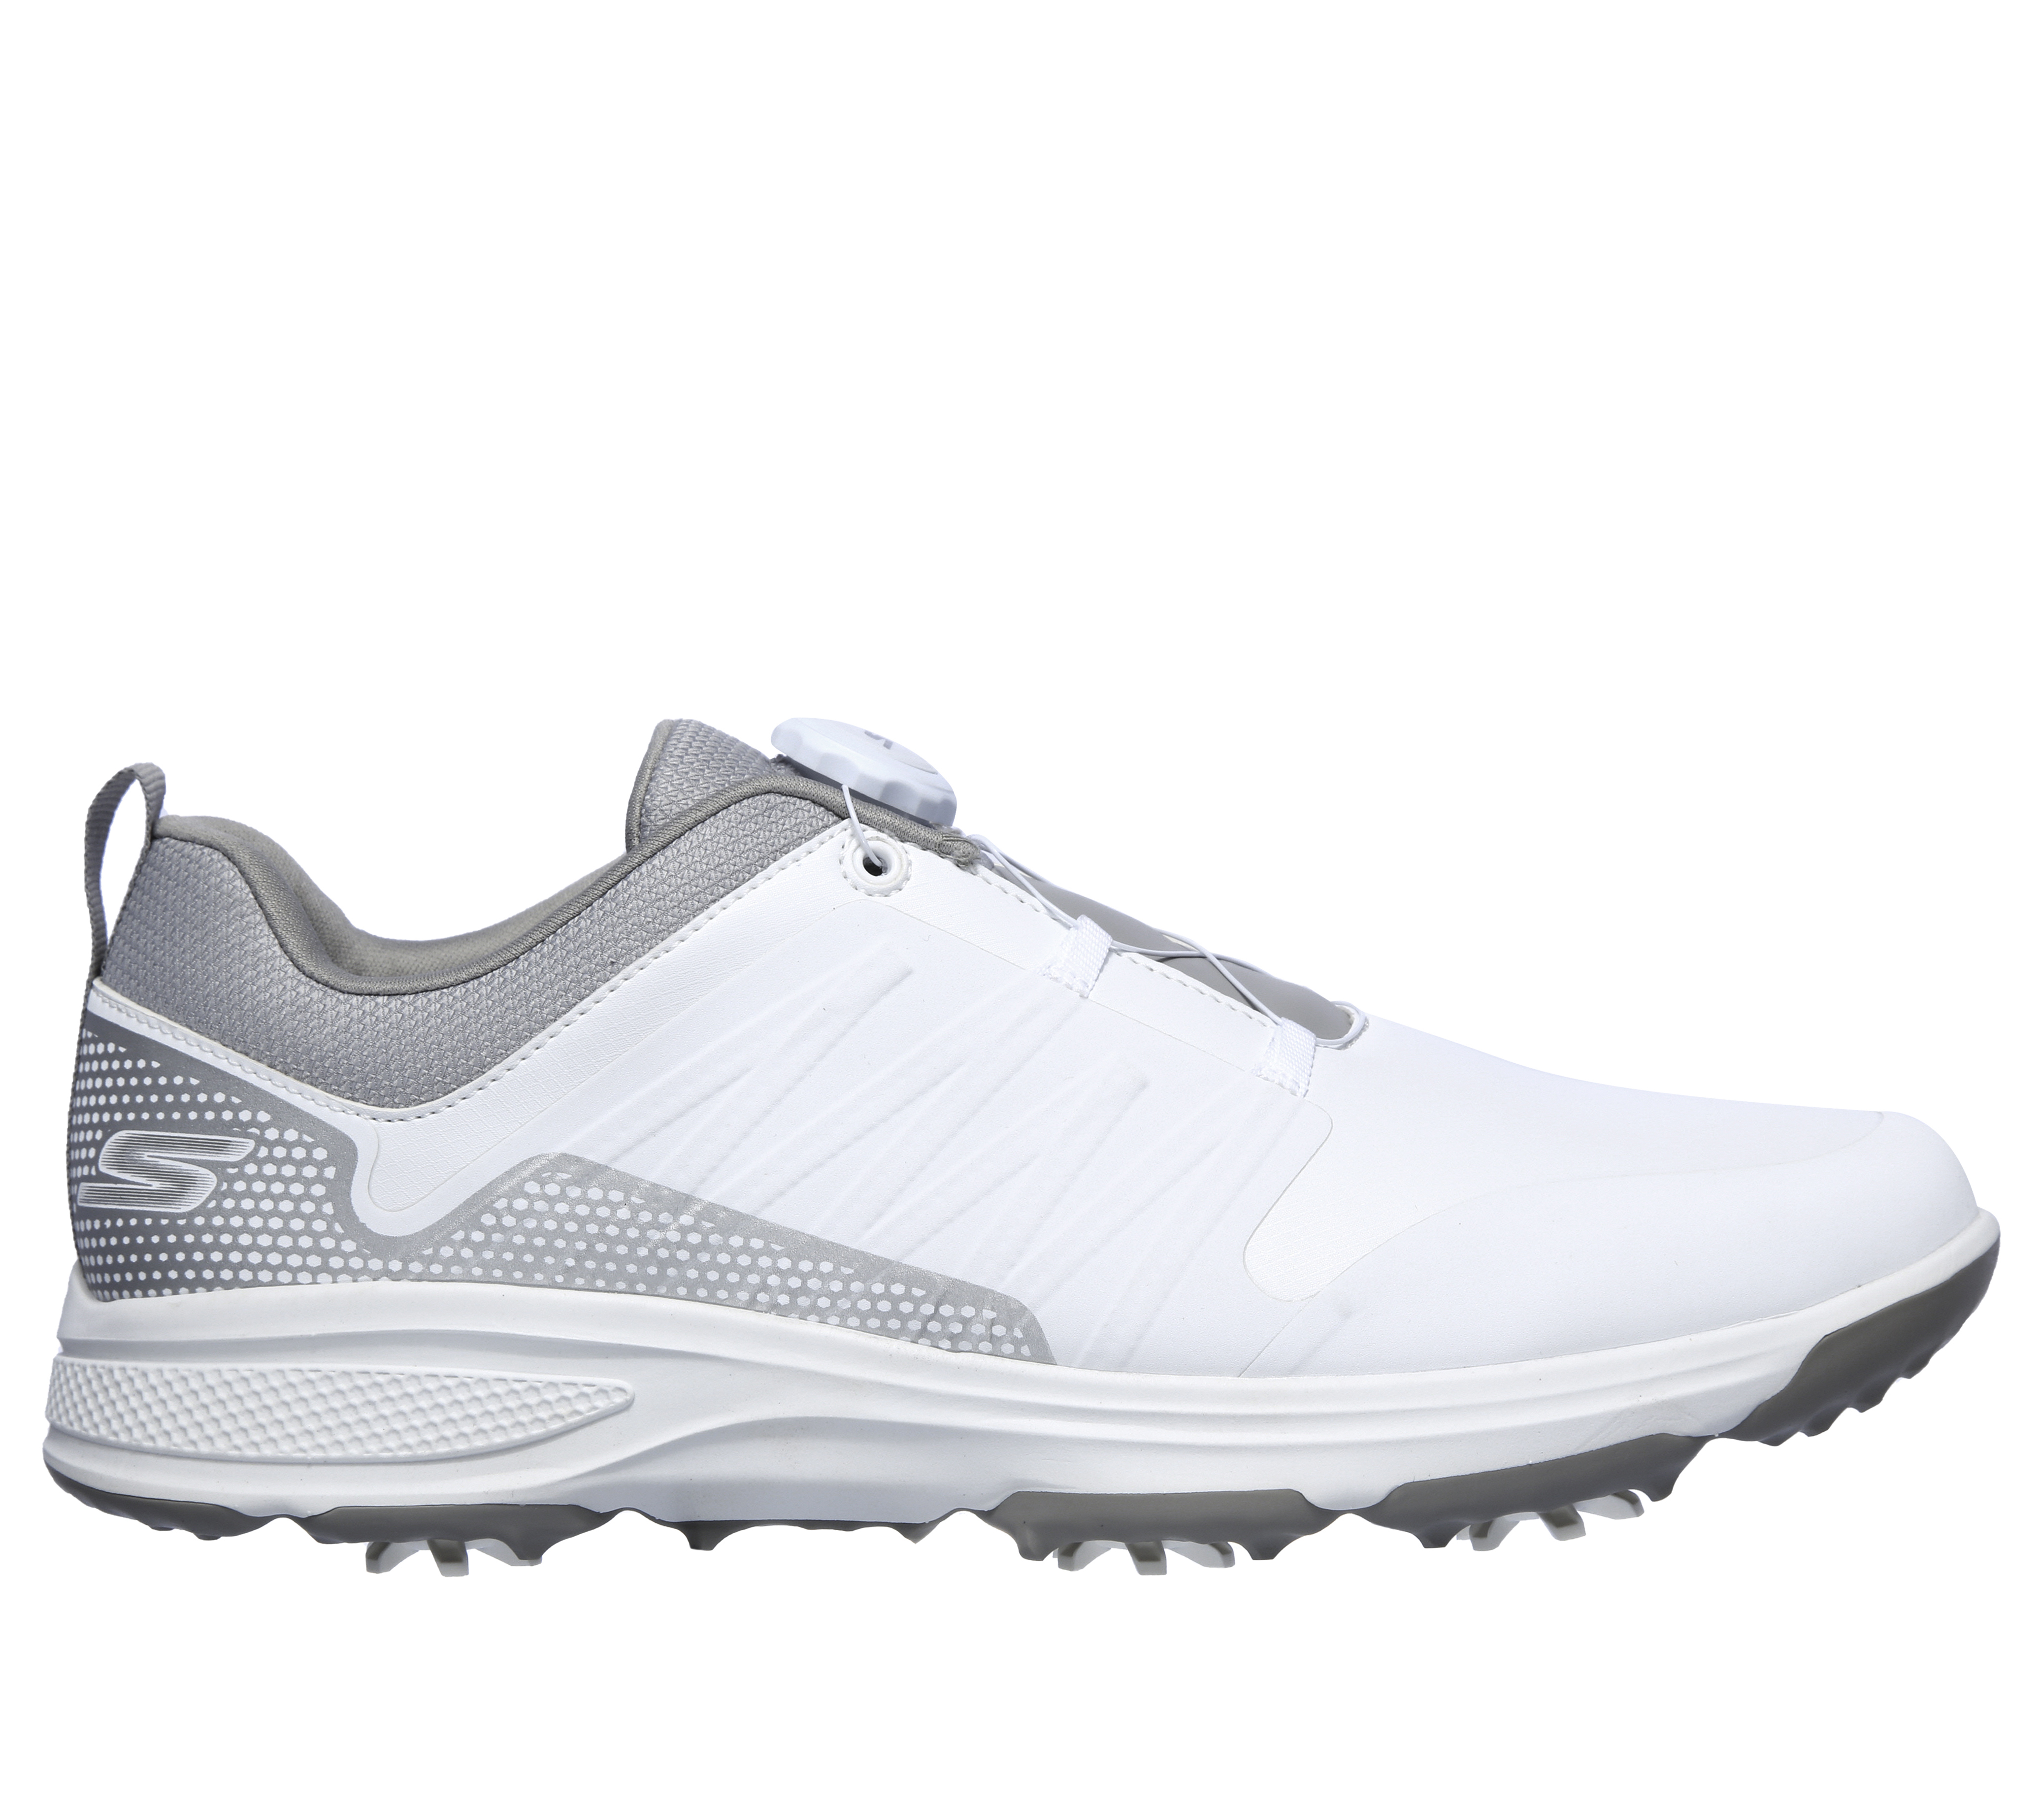 spikes for skechers golf shoes